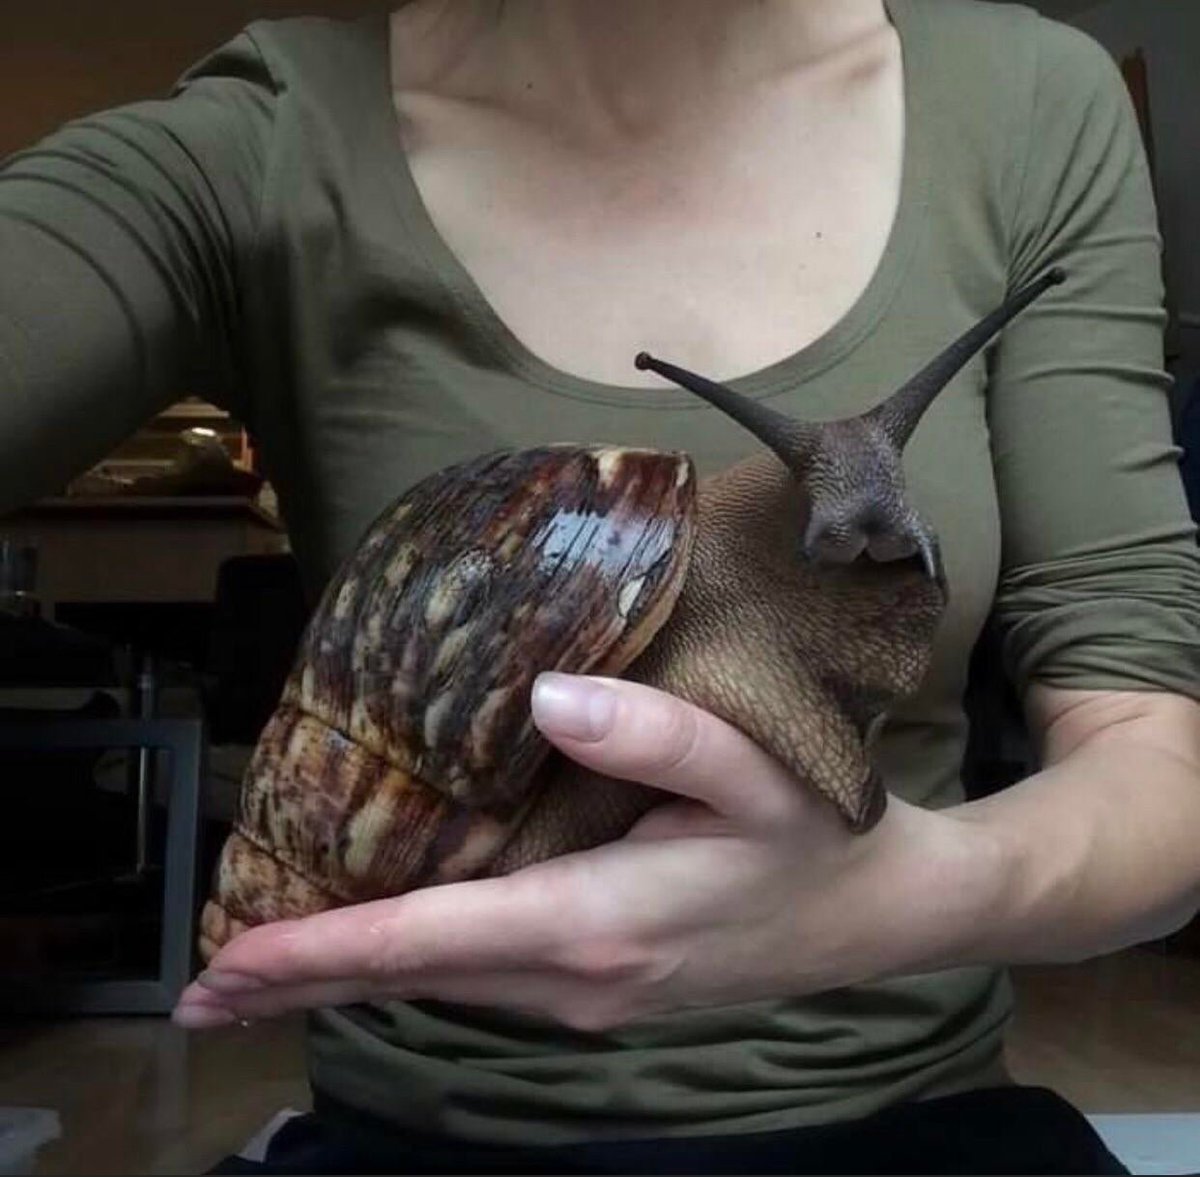 The African land snail